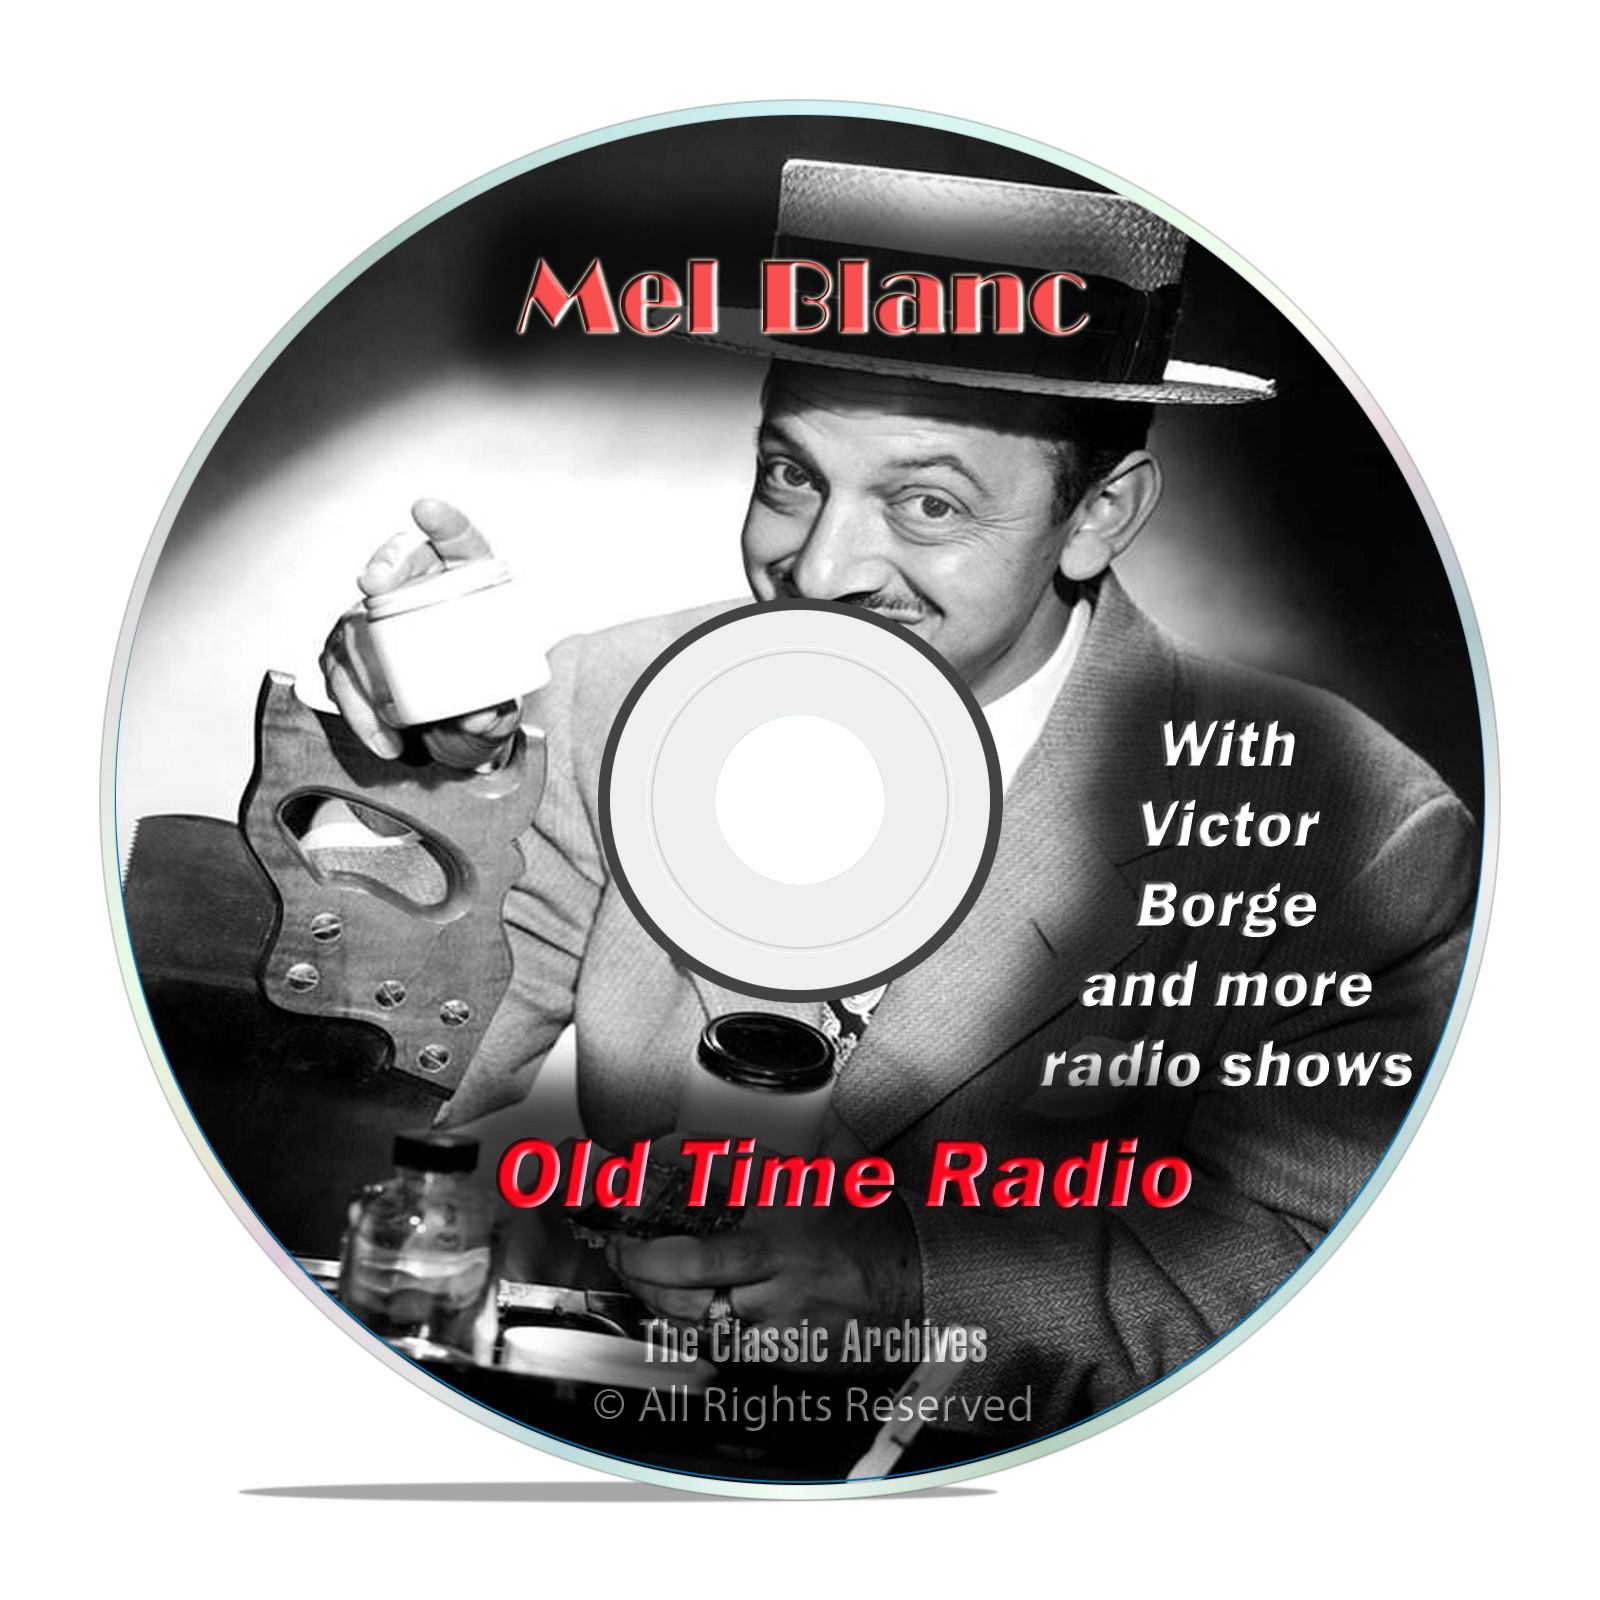 Mel Blanc, 672 Old Time Radio Sitcom Stand Up Comedy Variety Shows mp3 DVD